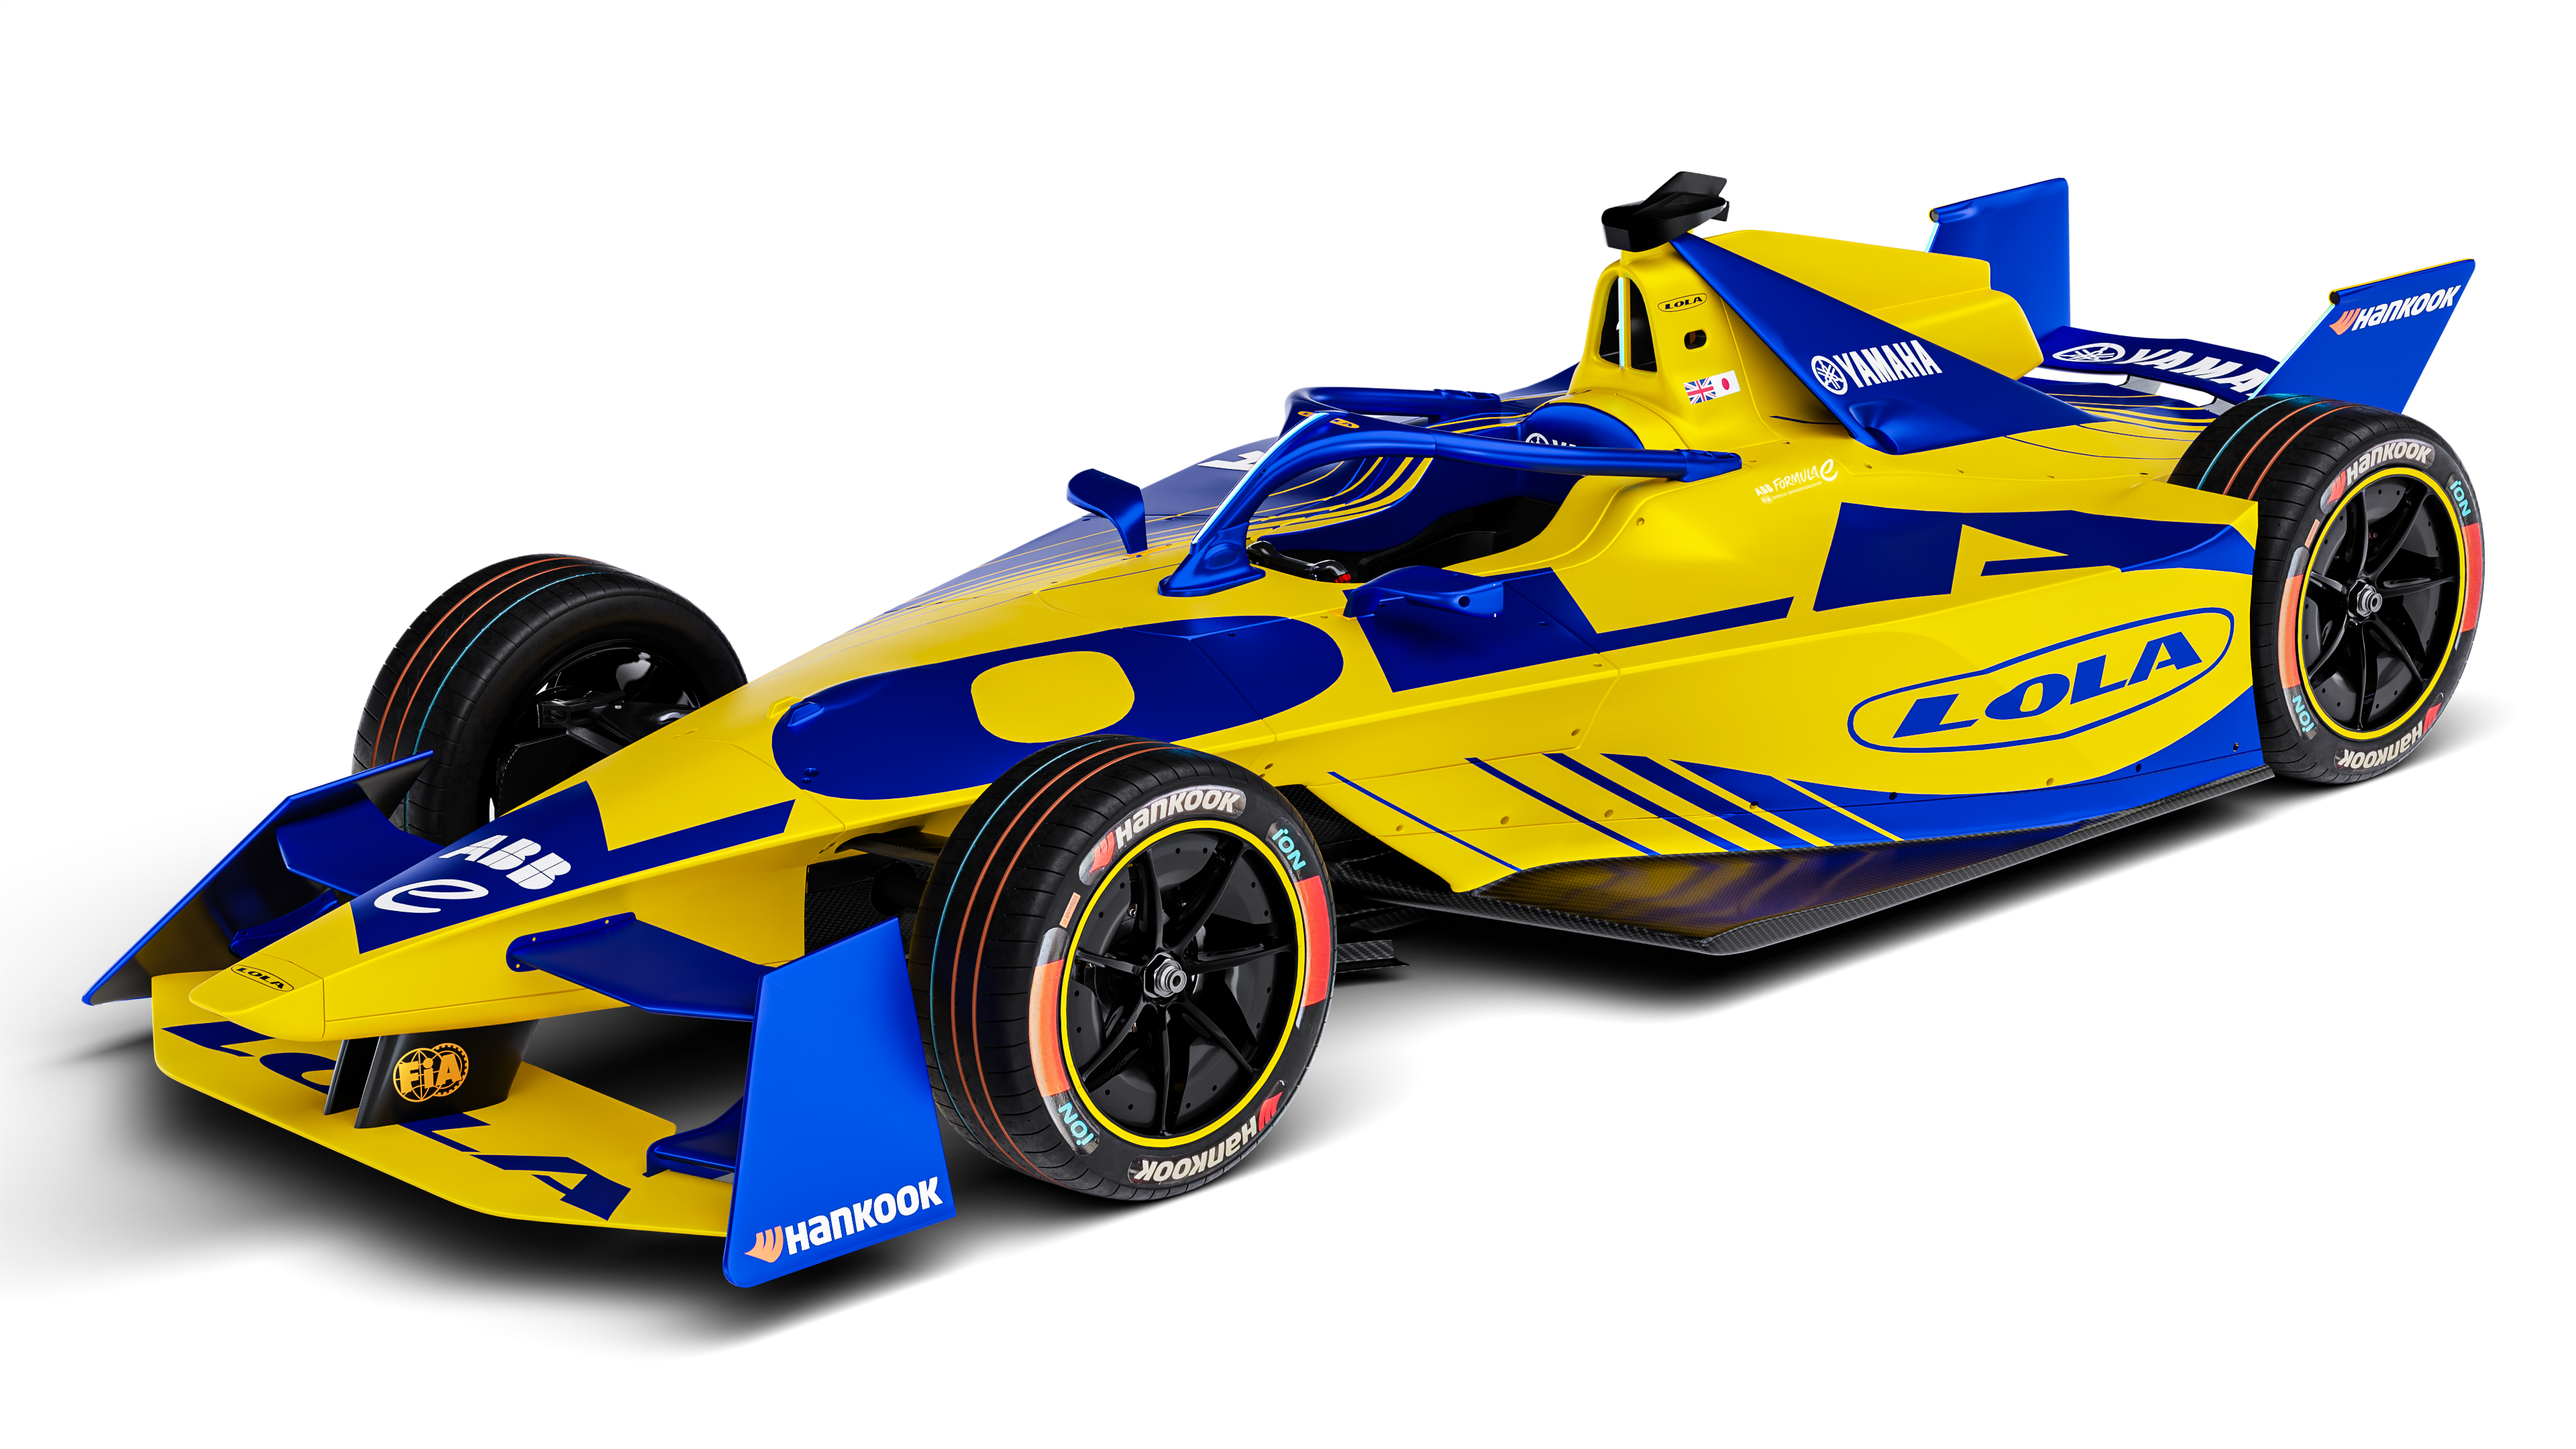 Lola Cars and Yamaha Motor Company Join Forces to Revolutionize Electric Racing: A Look at Their Entry into Formula E